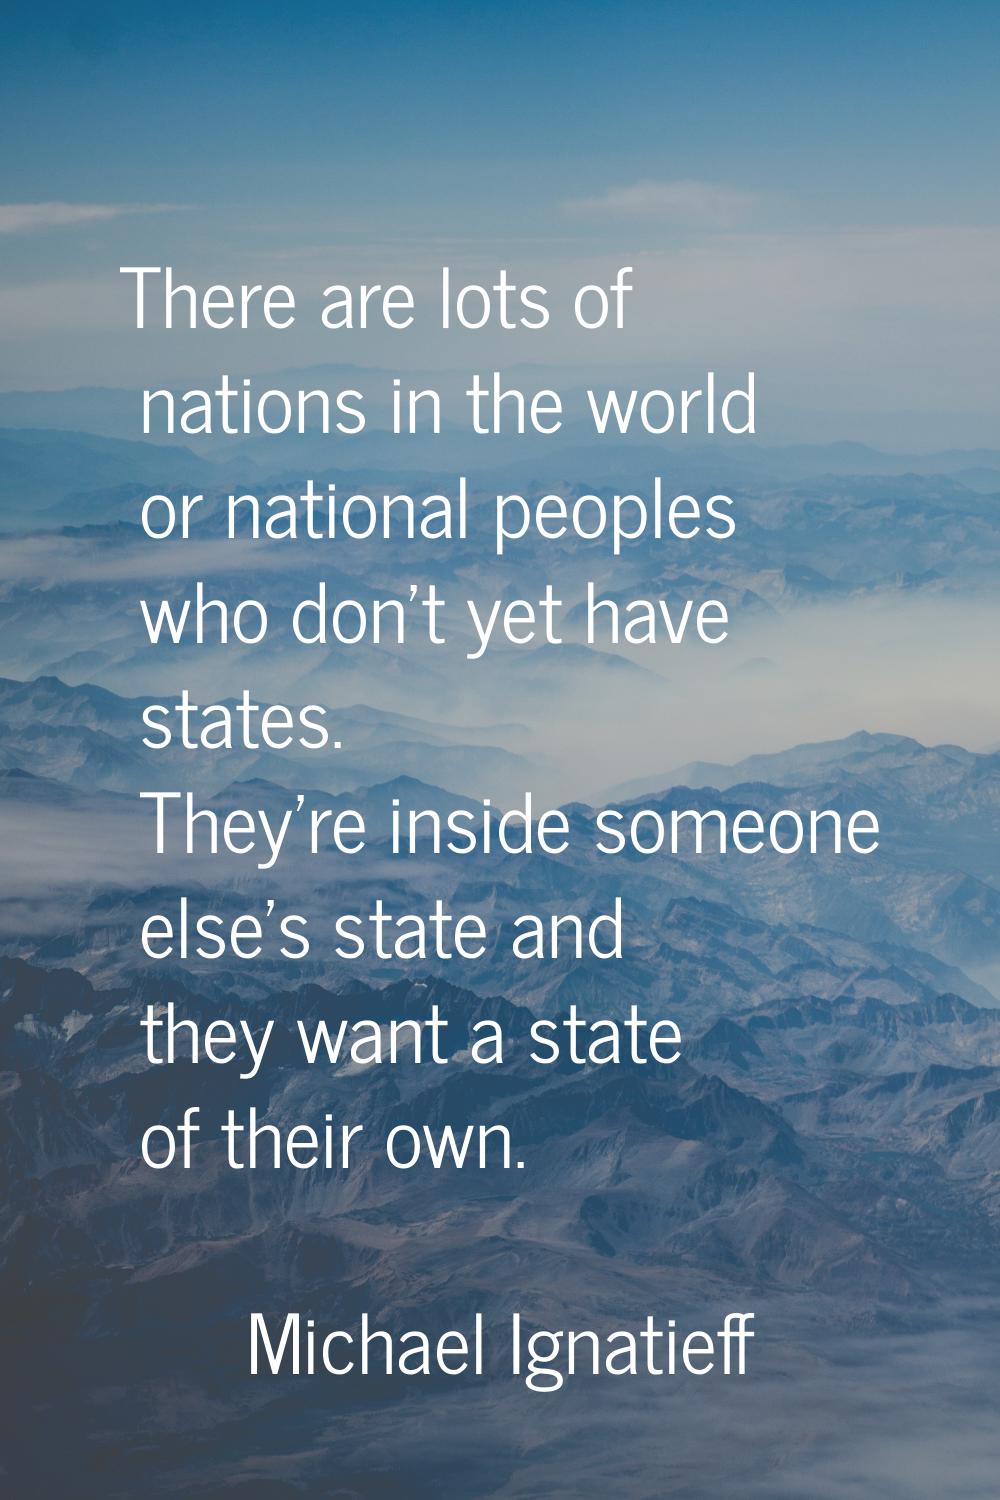 There are lots of nations in the world or national peoples who don't yet have states. They're insid